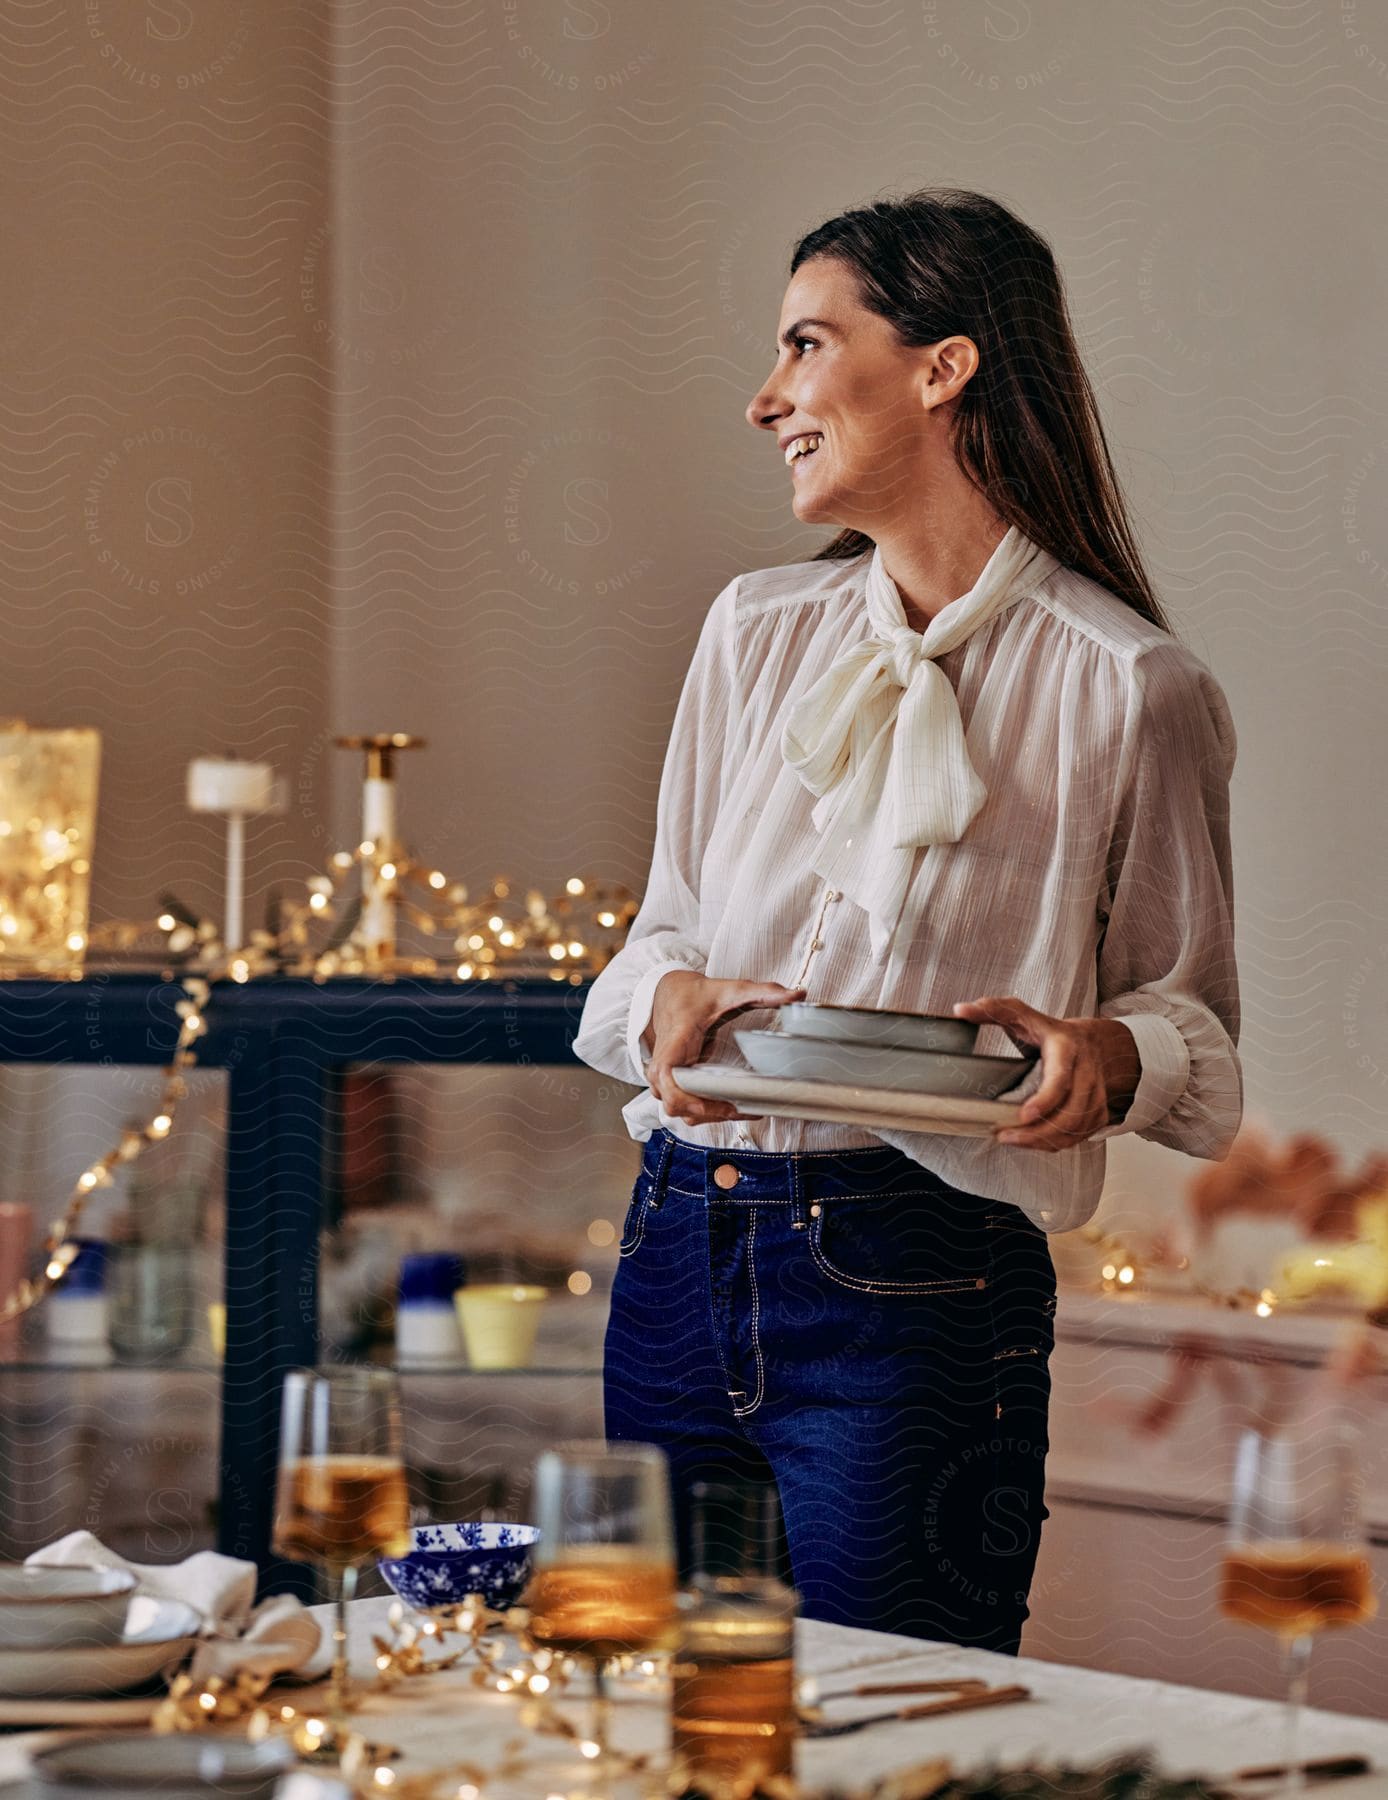 A woman holding dishes is smiling while looking to the side.